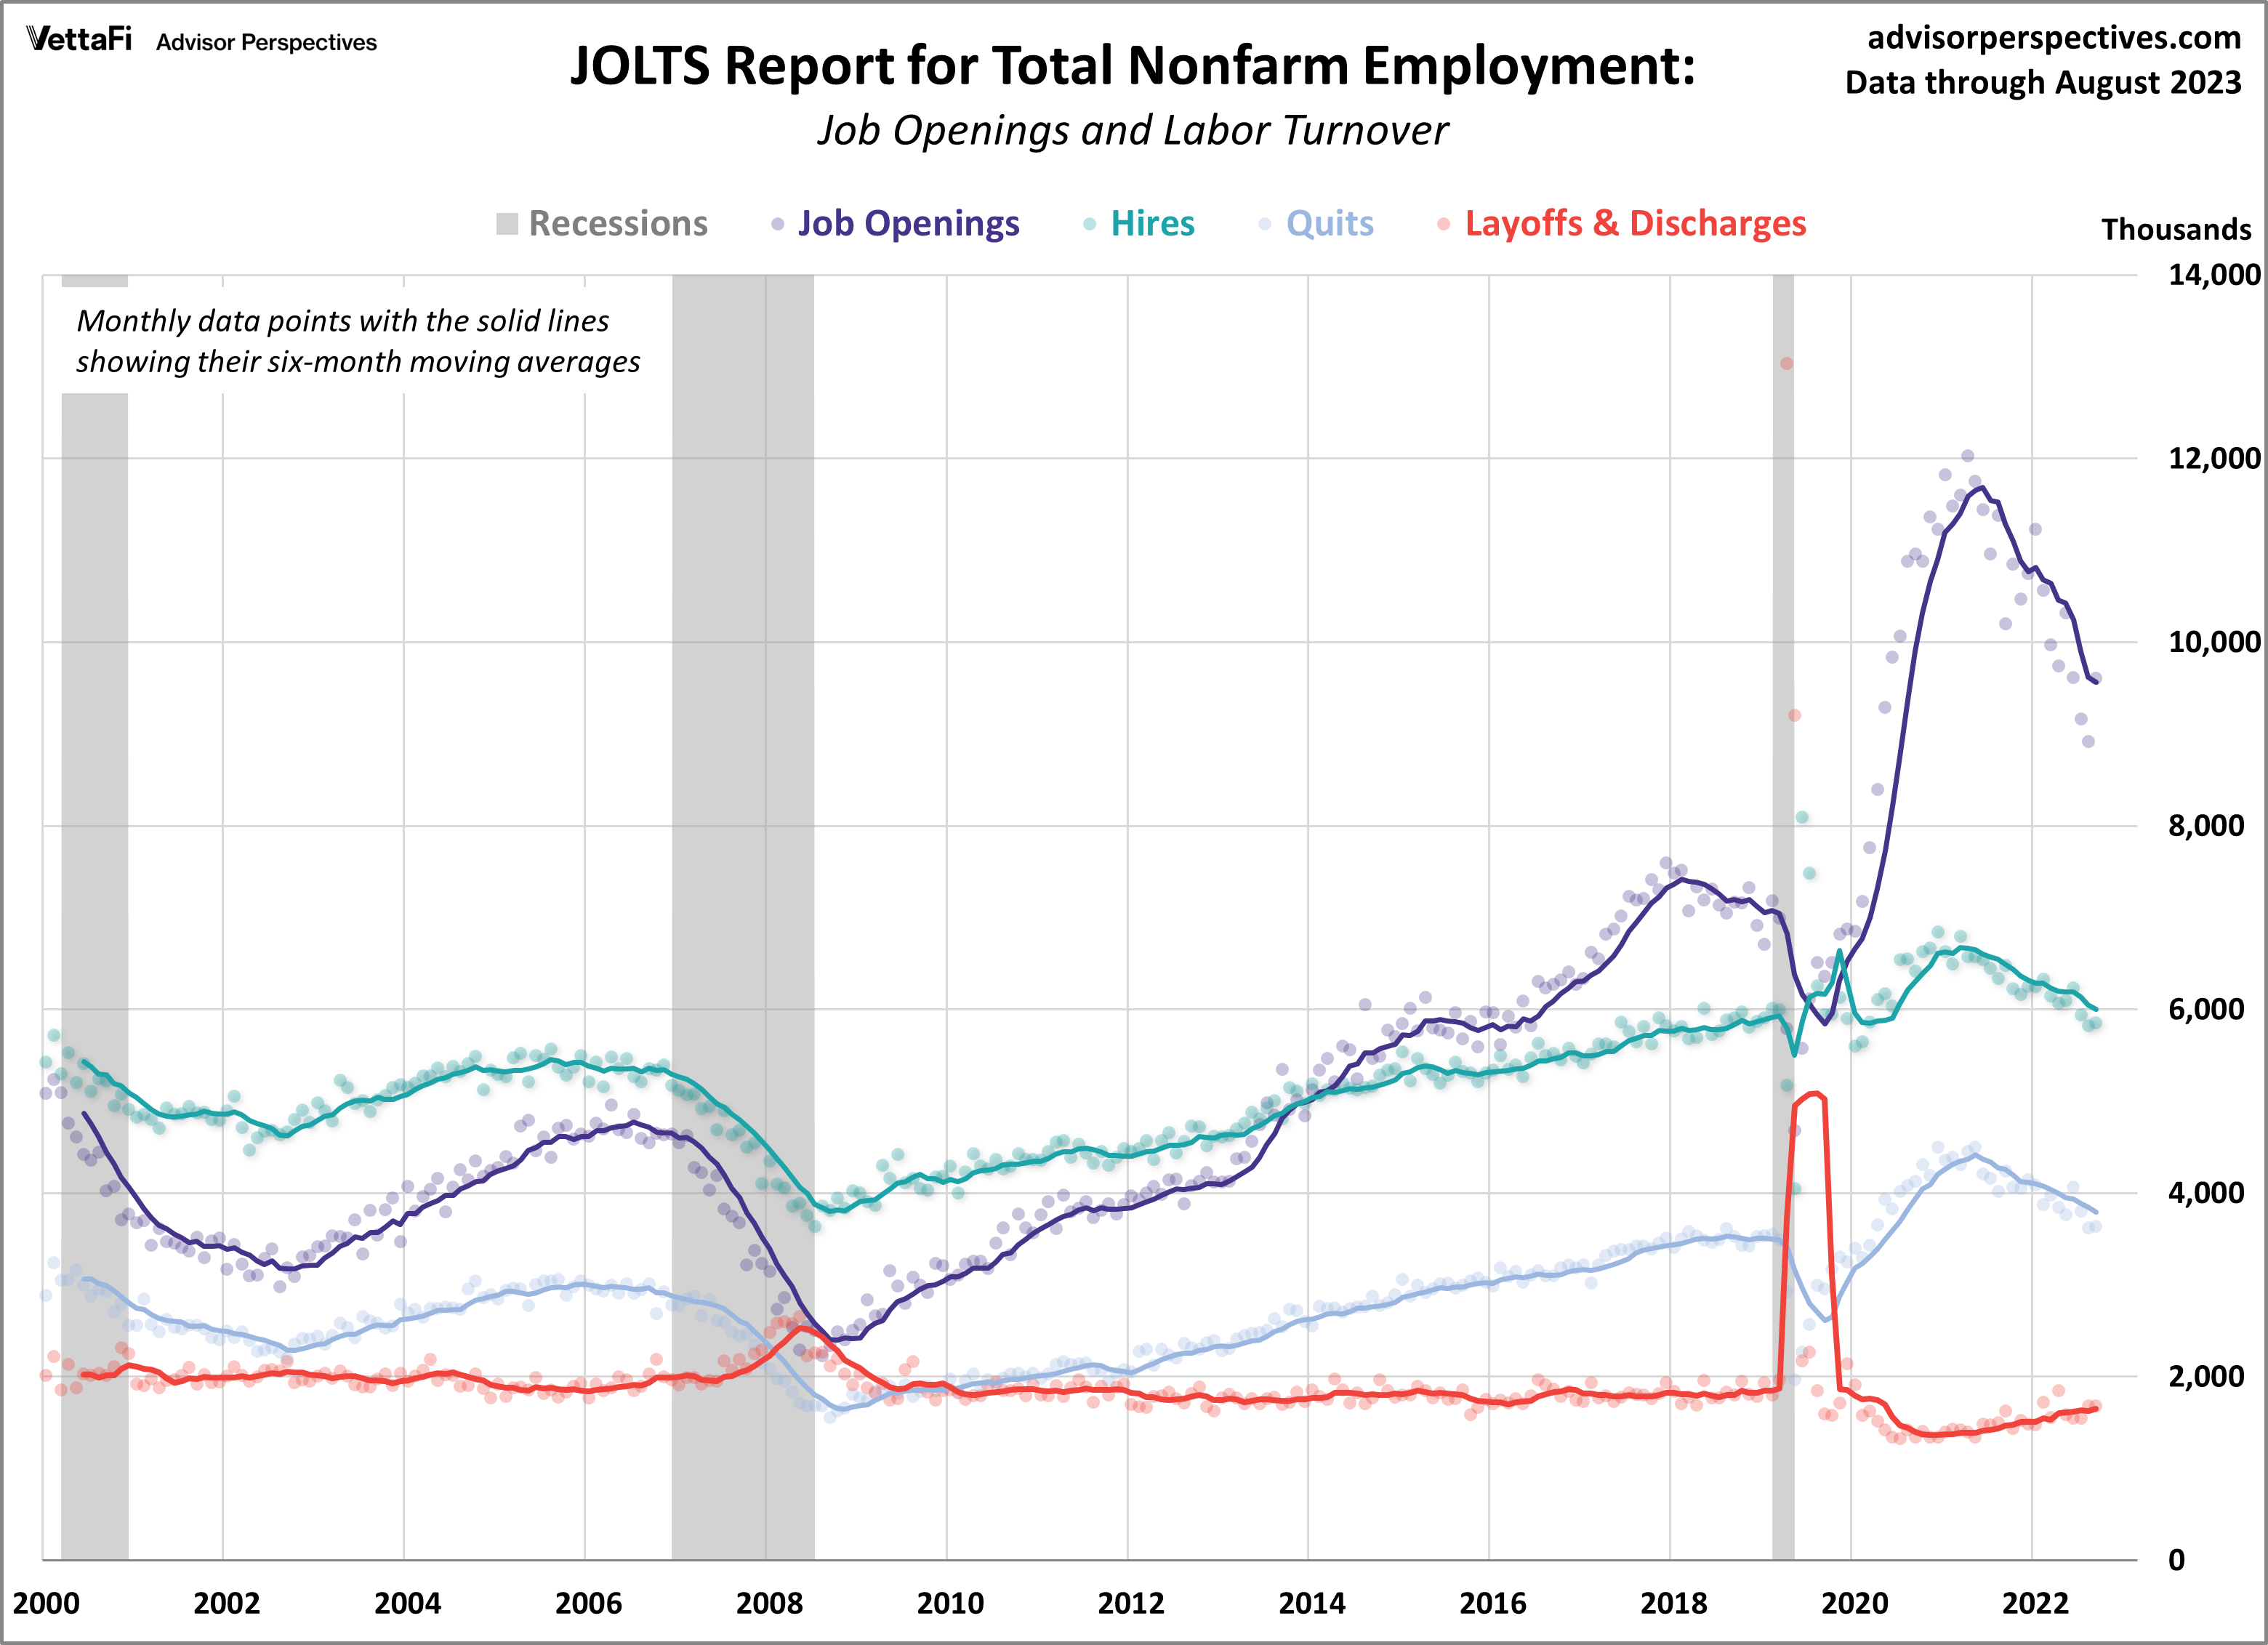 JOLTS Report for Total Nonfirm Employment